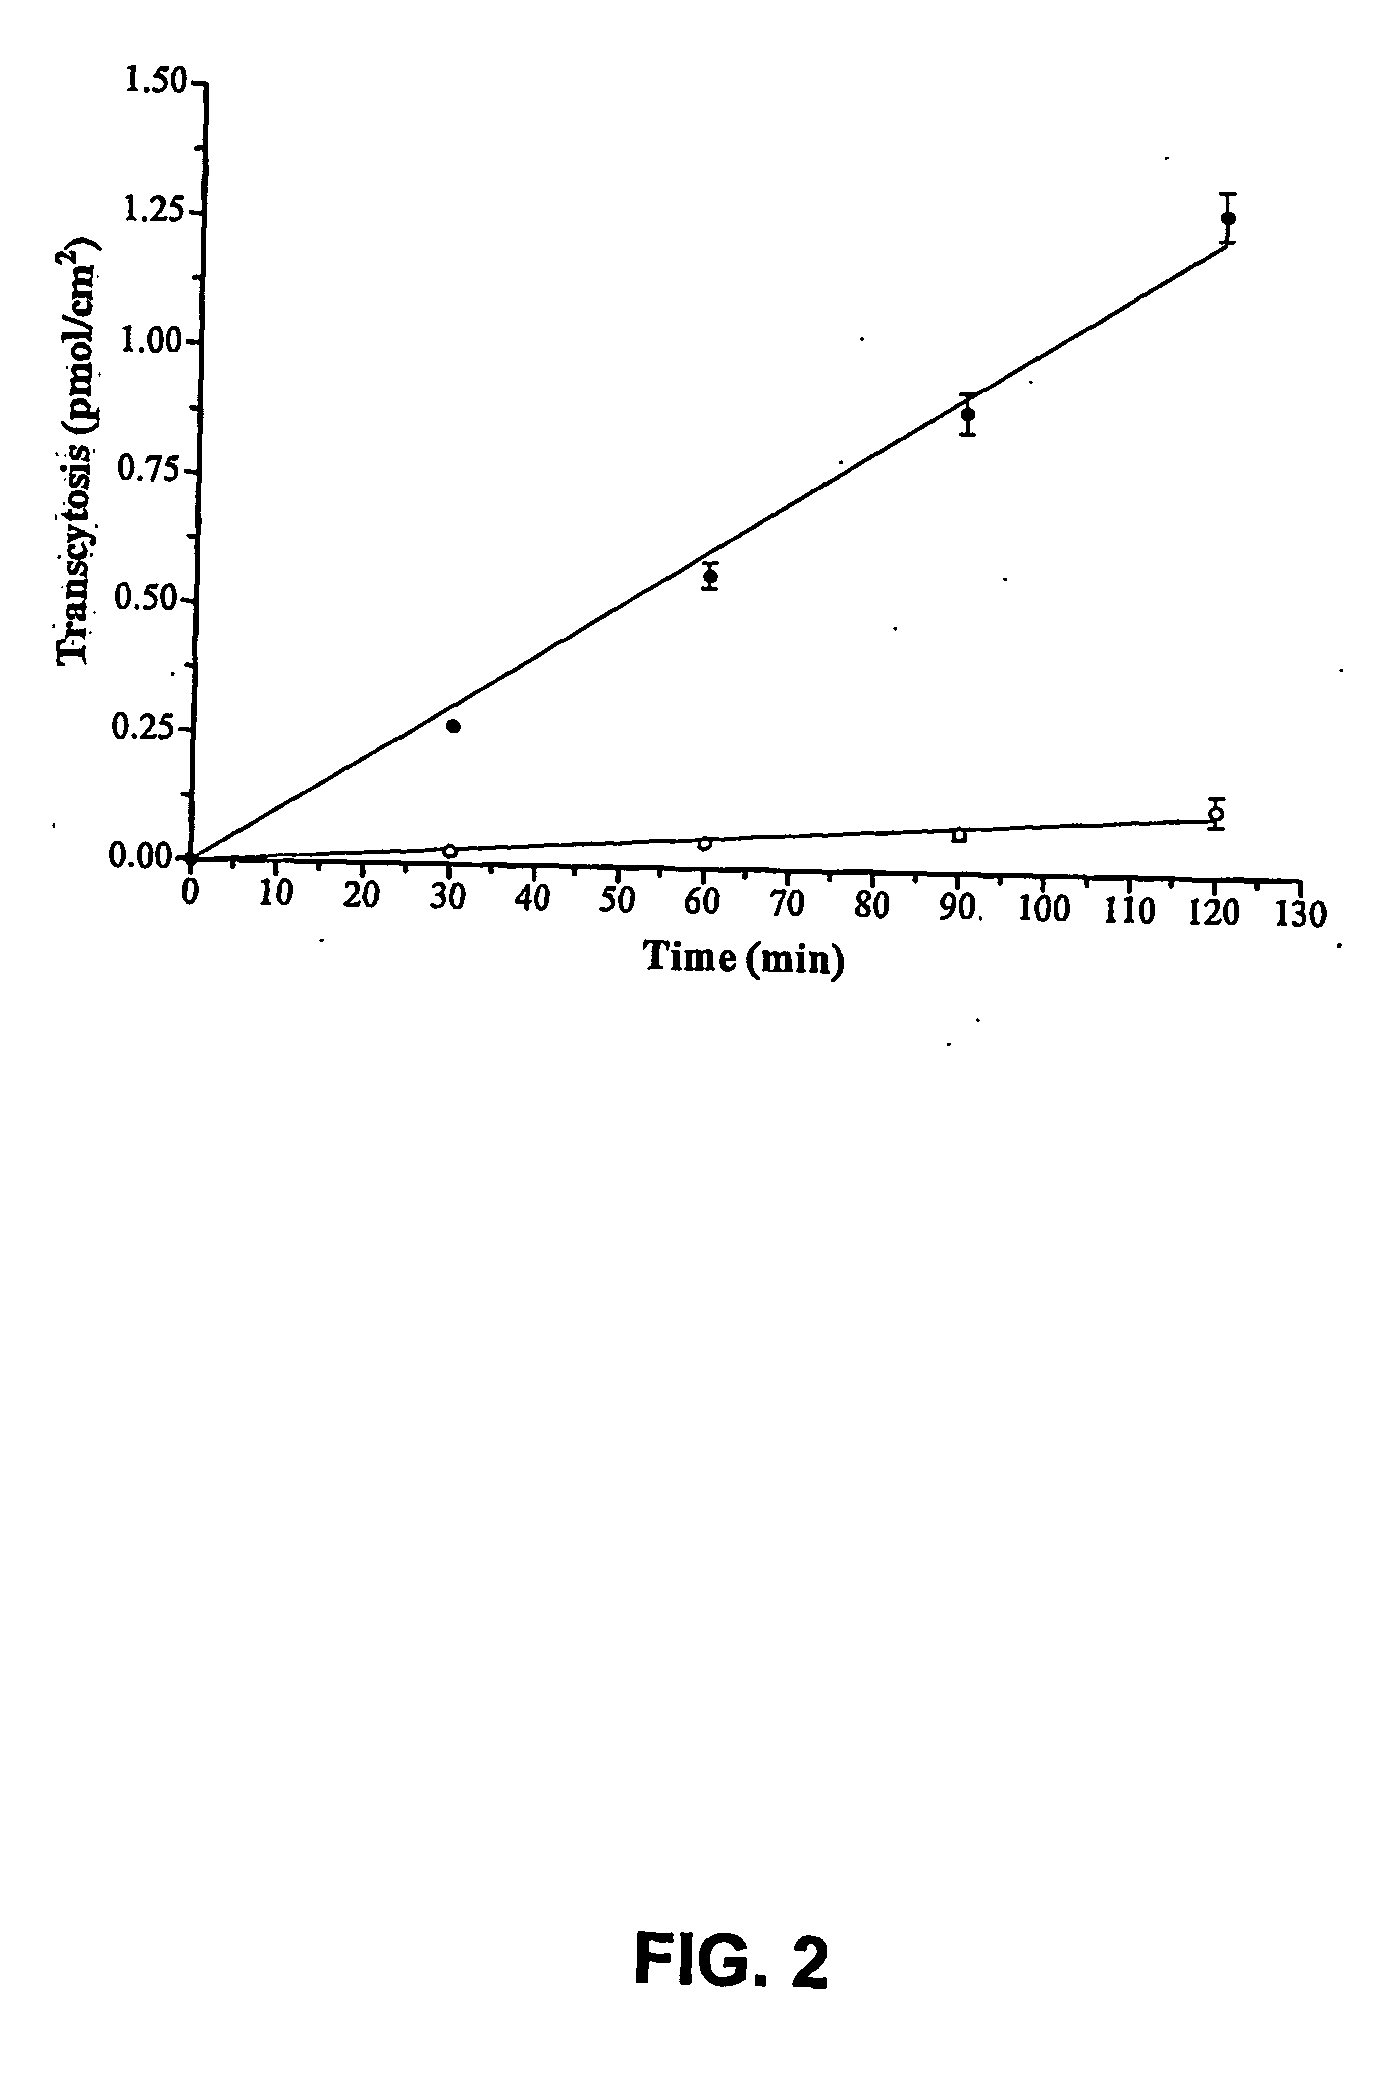 Method for transporting a compound across the blood-brain barrier